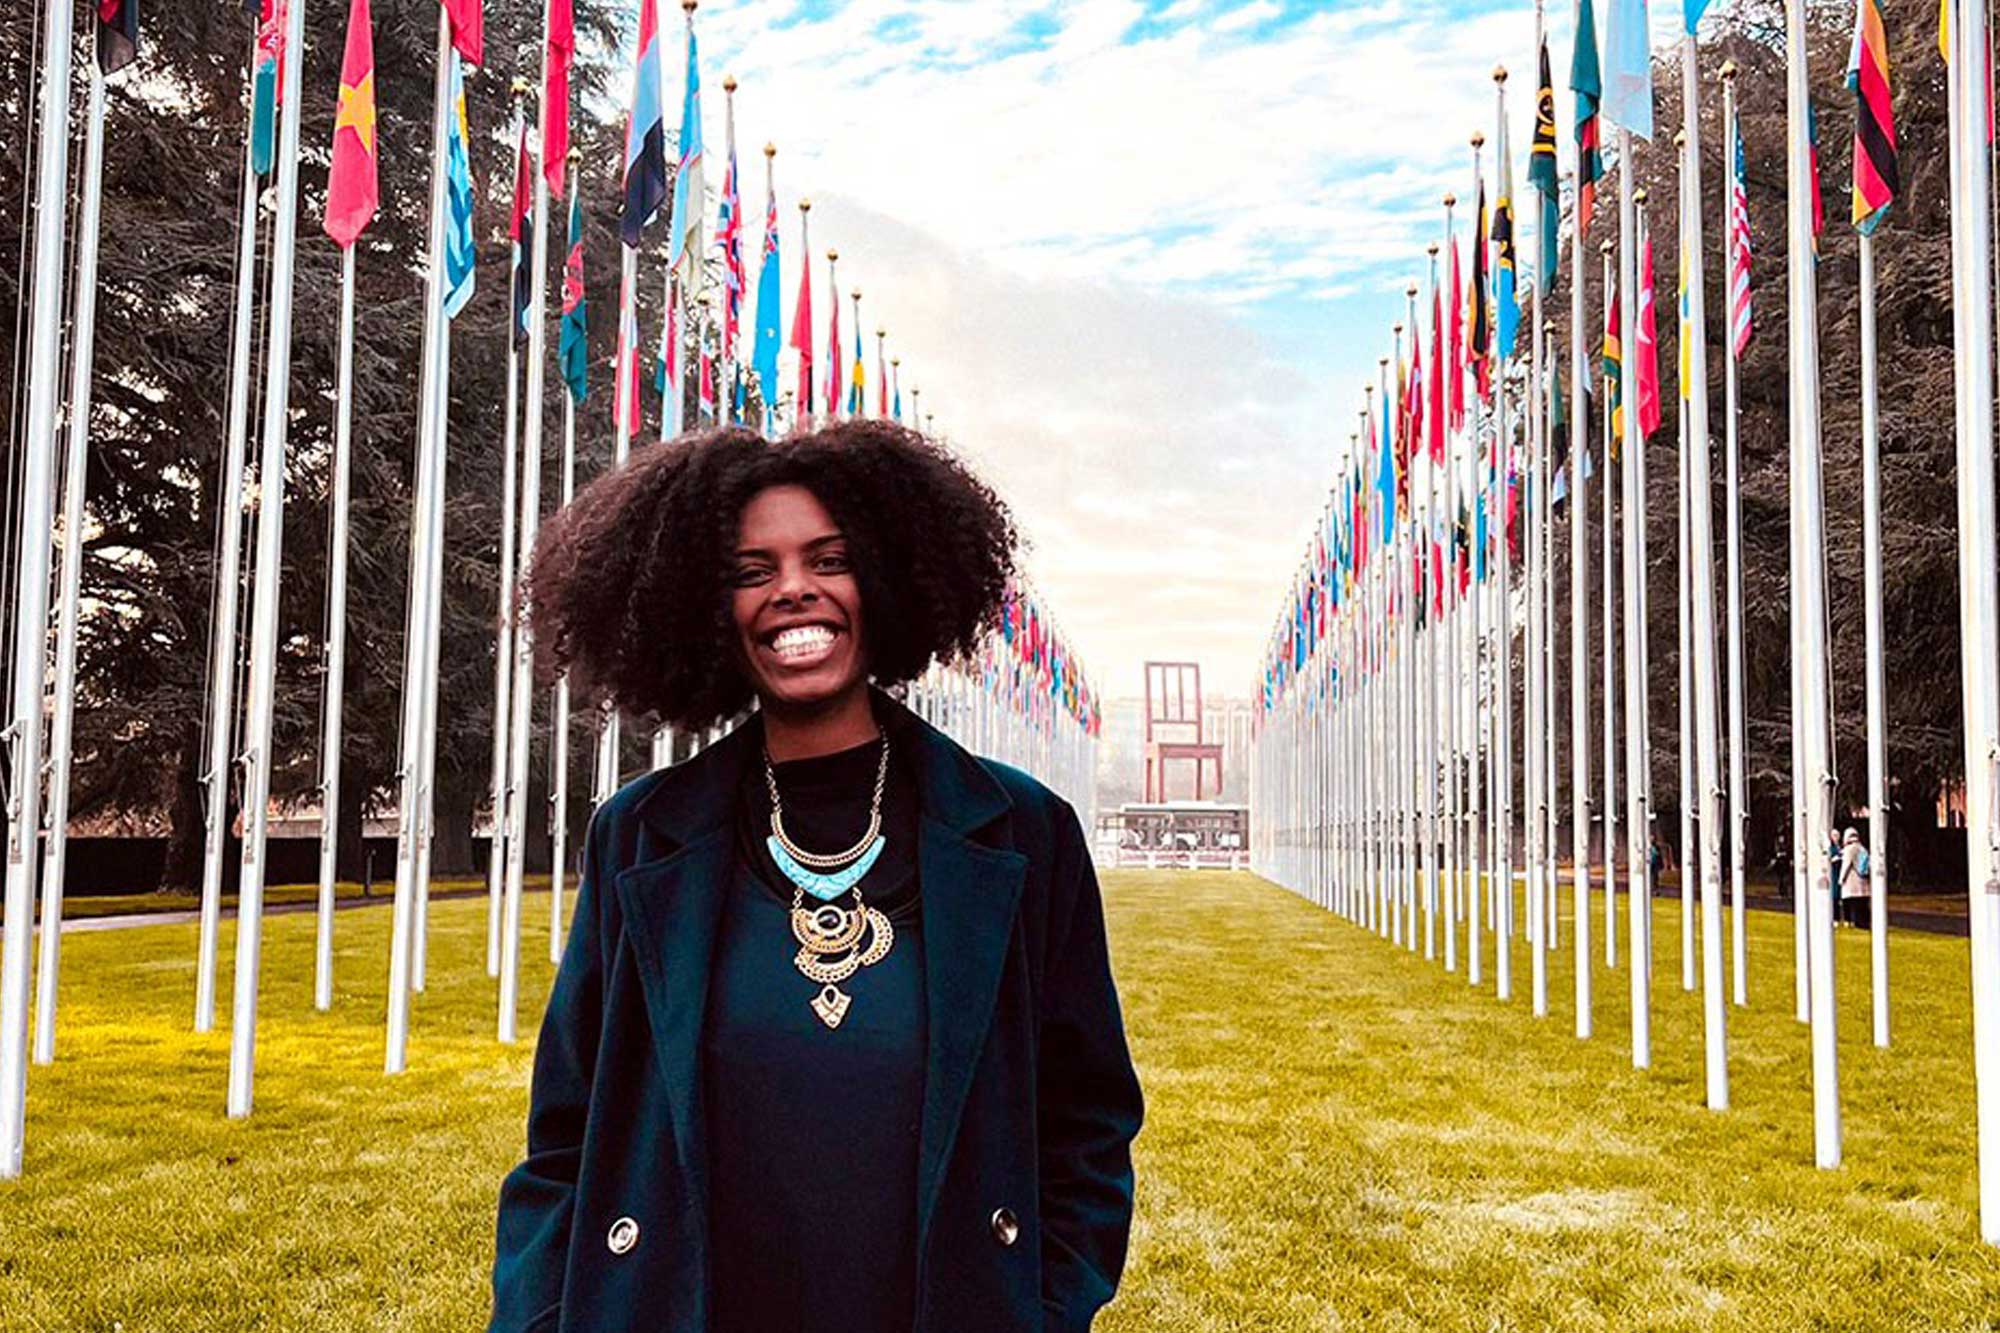 Monique stands in an open space with 2 rows of flags behind her